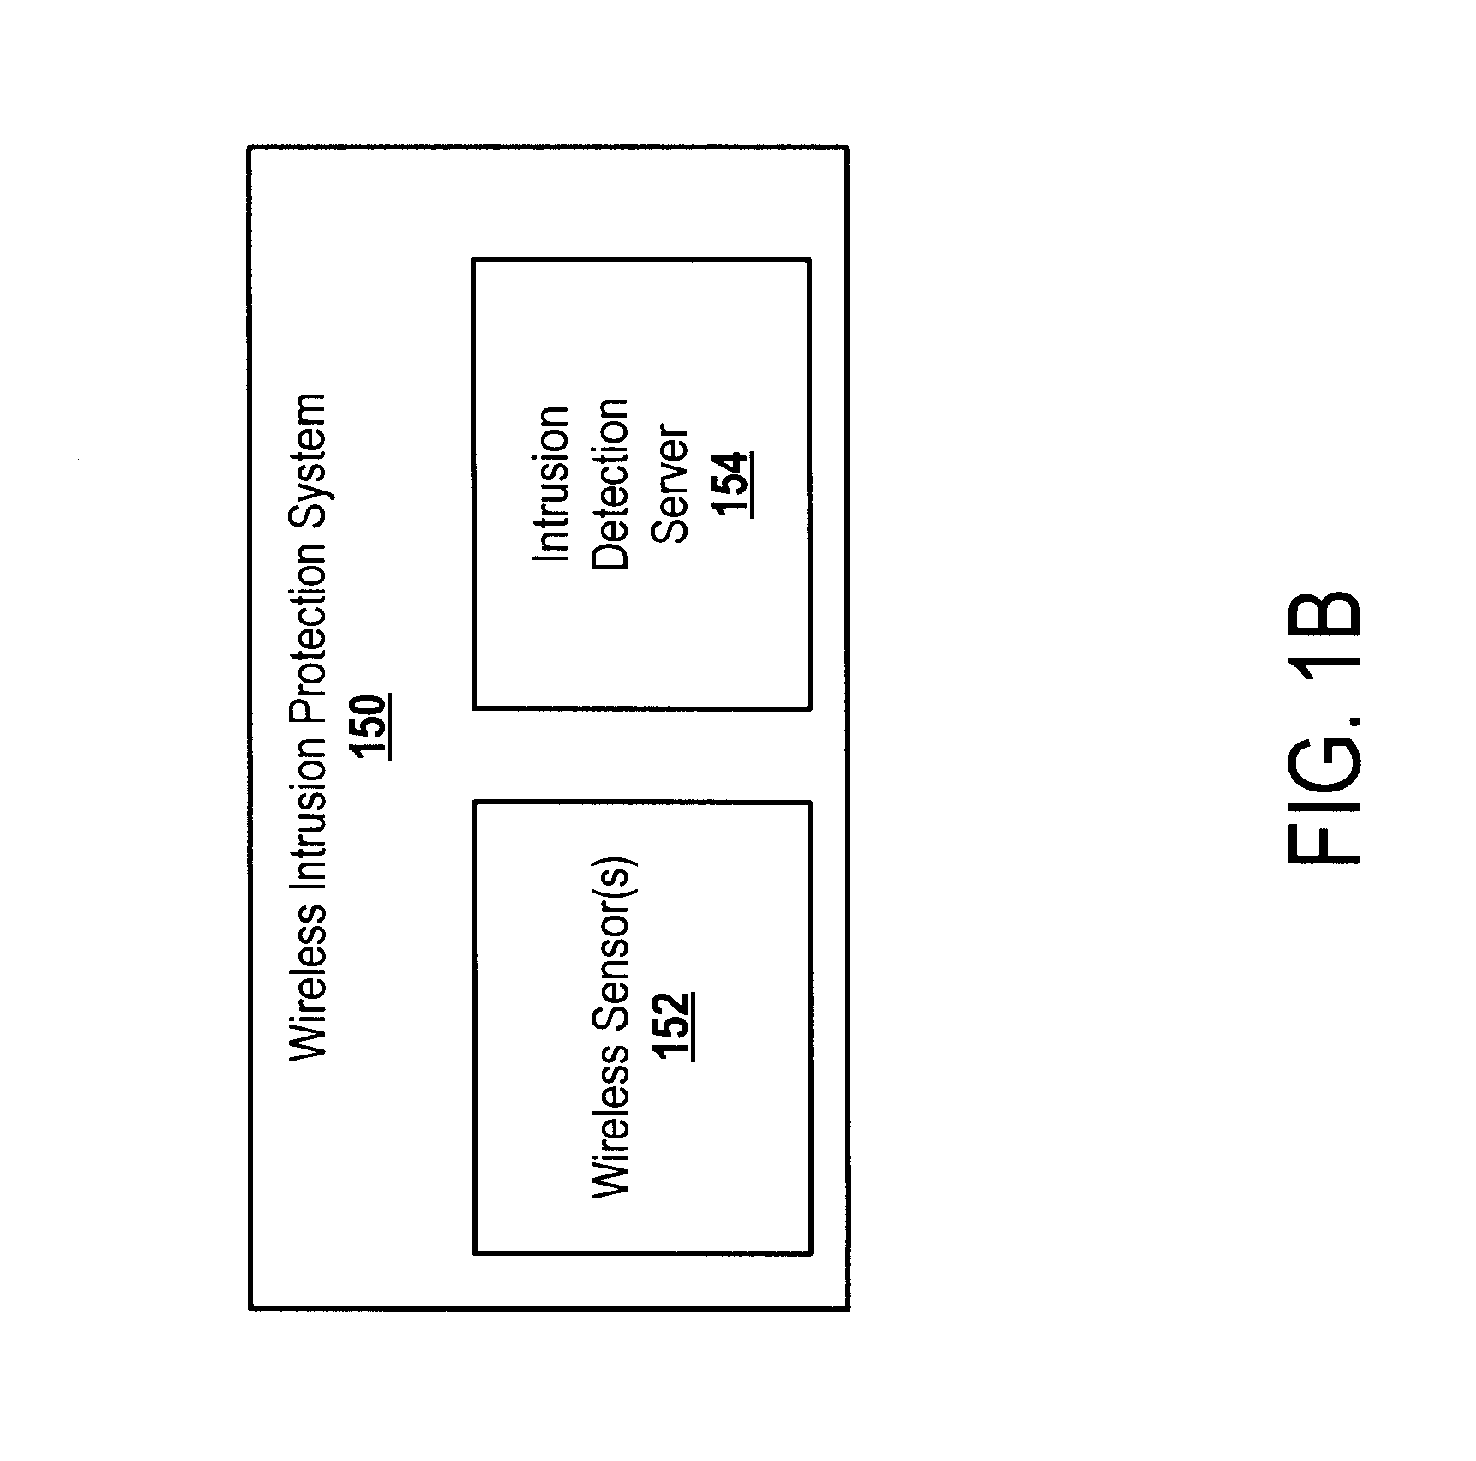 Systems and Methods for Wireless Security Using Distributed Collaboration of Wireless Clients